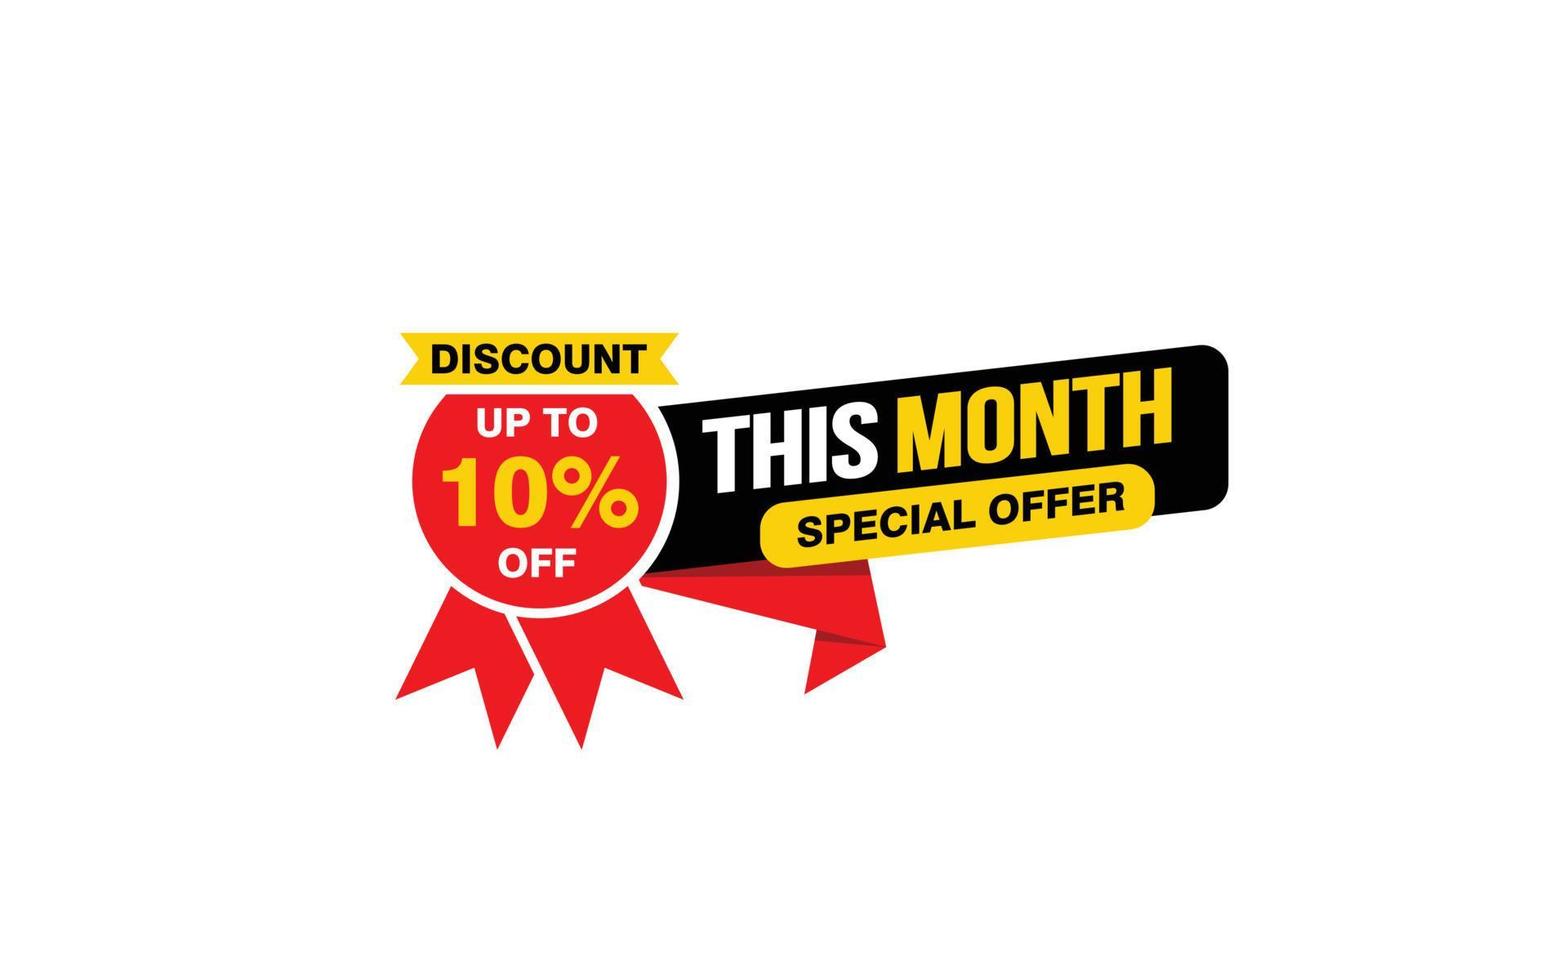 10 Percent THIS MONTH offer, clearance, promotion banner layout with sticker style. vector